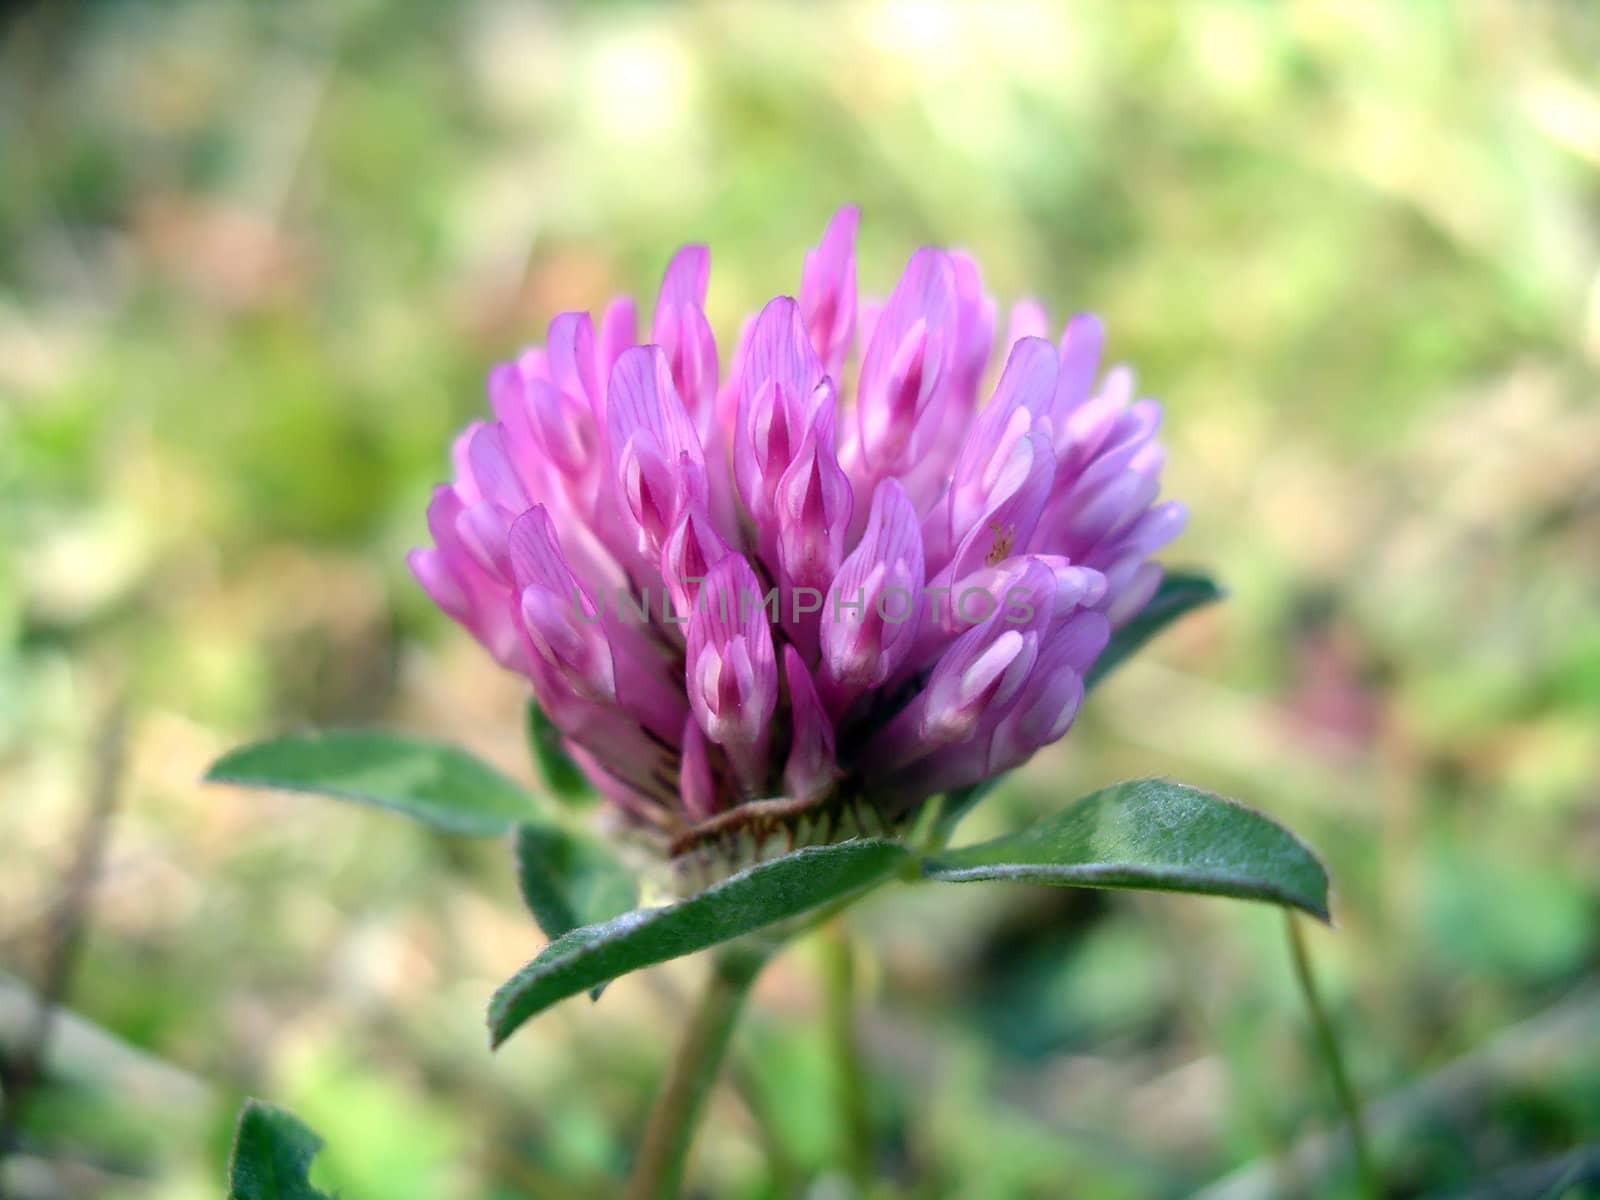 Red Clover by monner